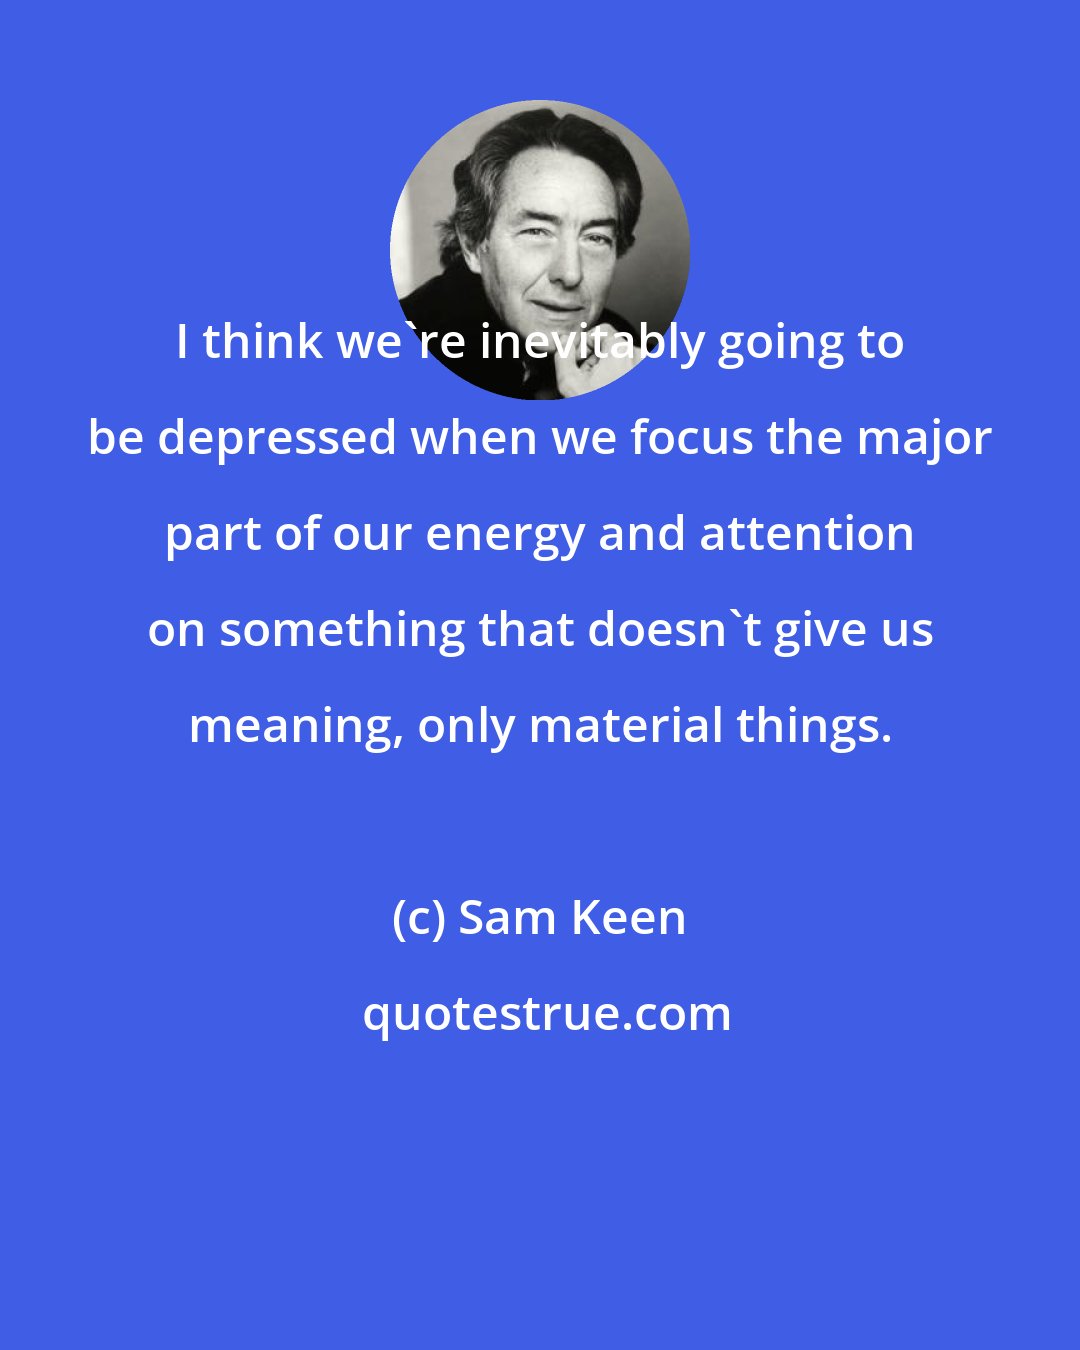 Sam Keen: I think we're inevitably going to be depressed when we focus the major part of our energy and attention on something that doesn't give us meaning, only material things.